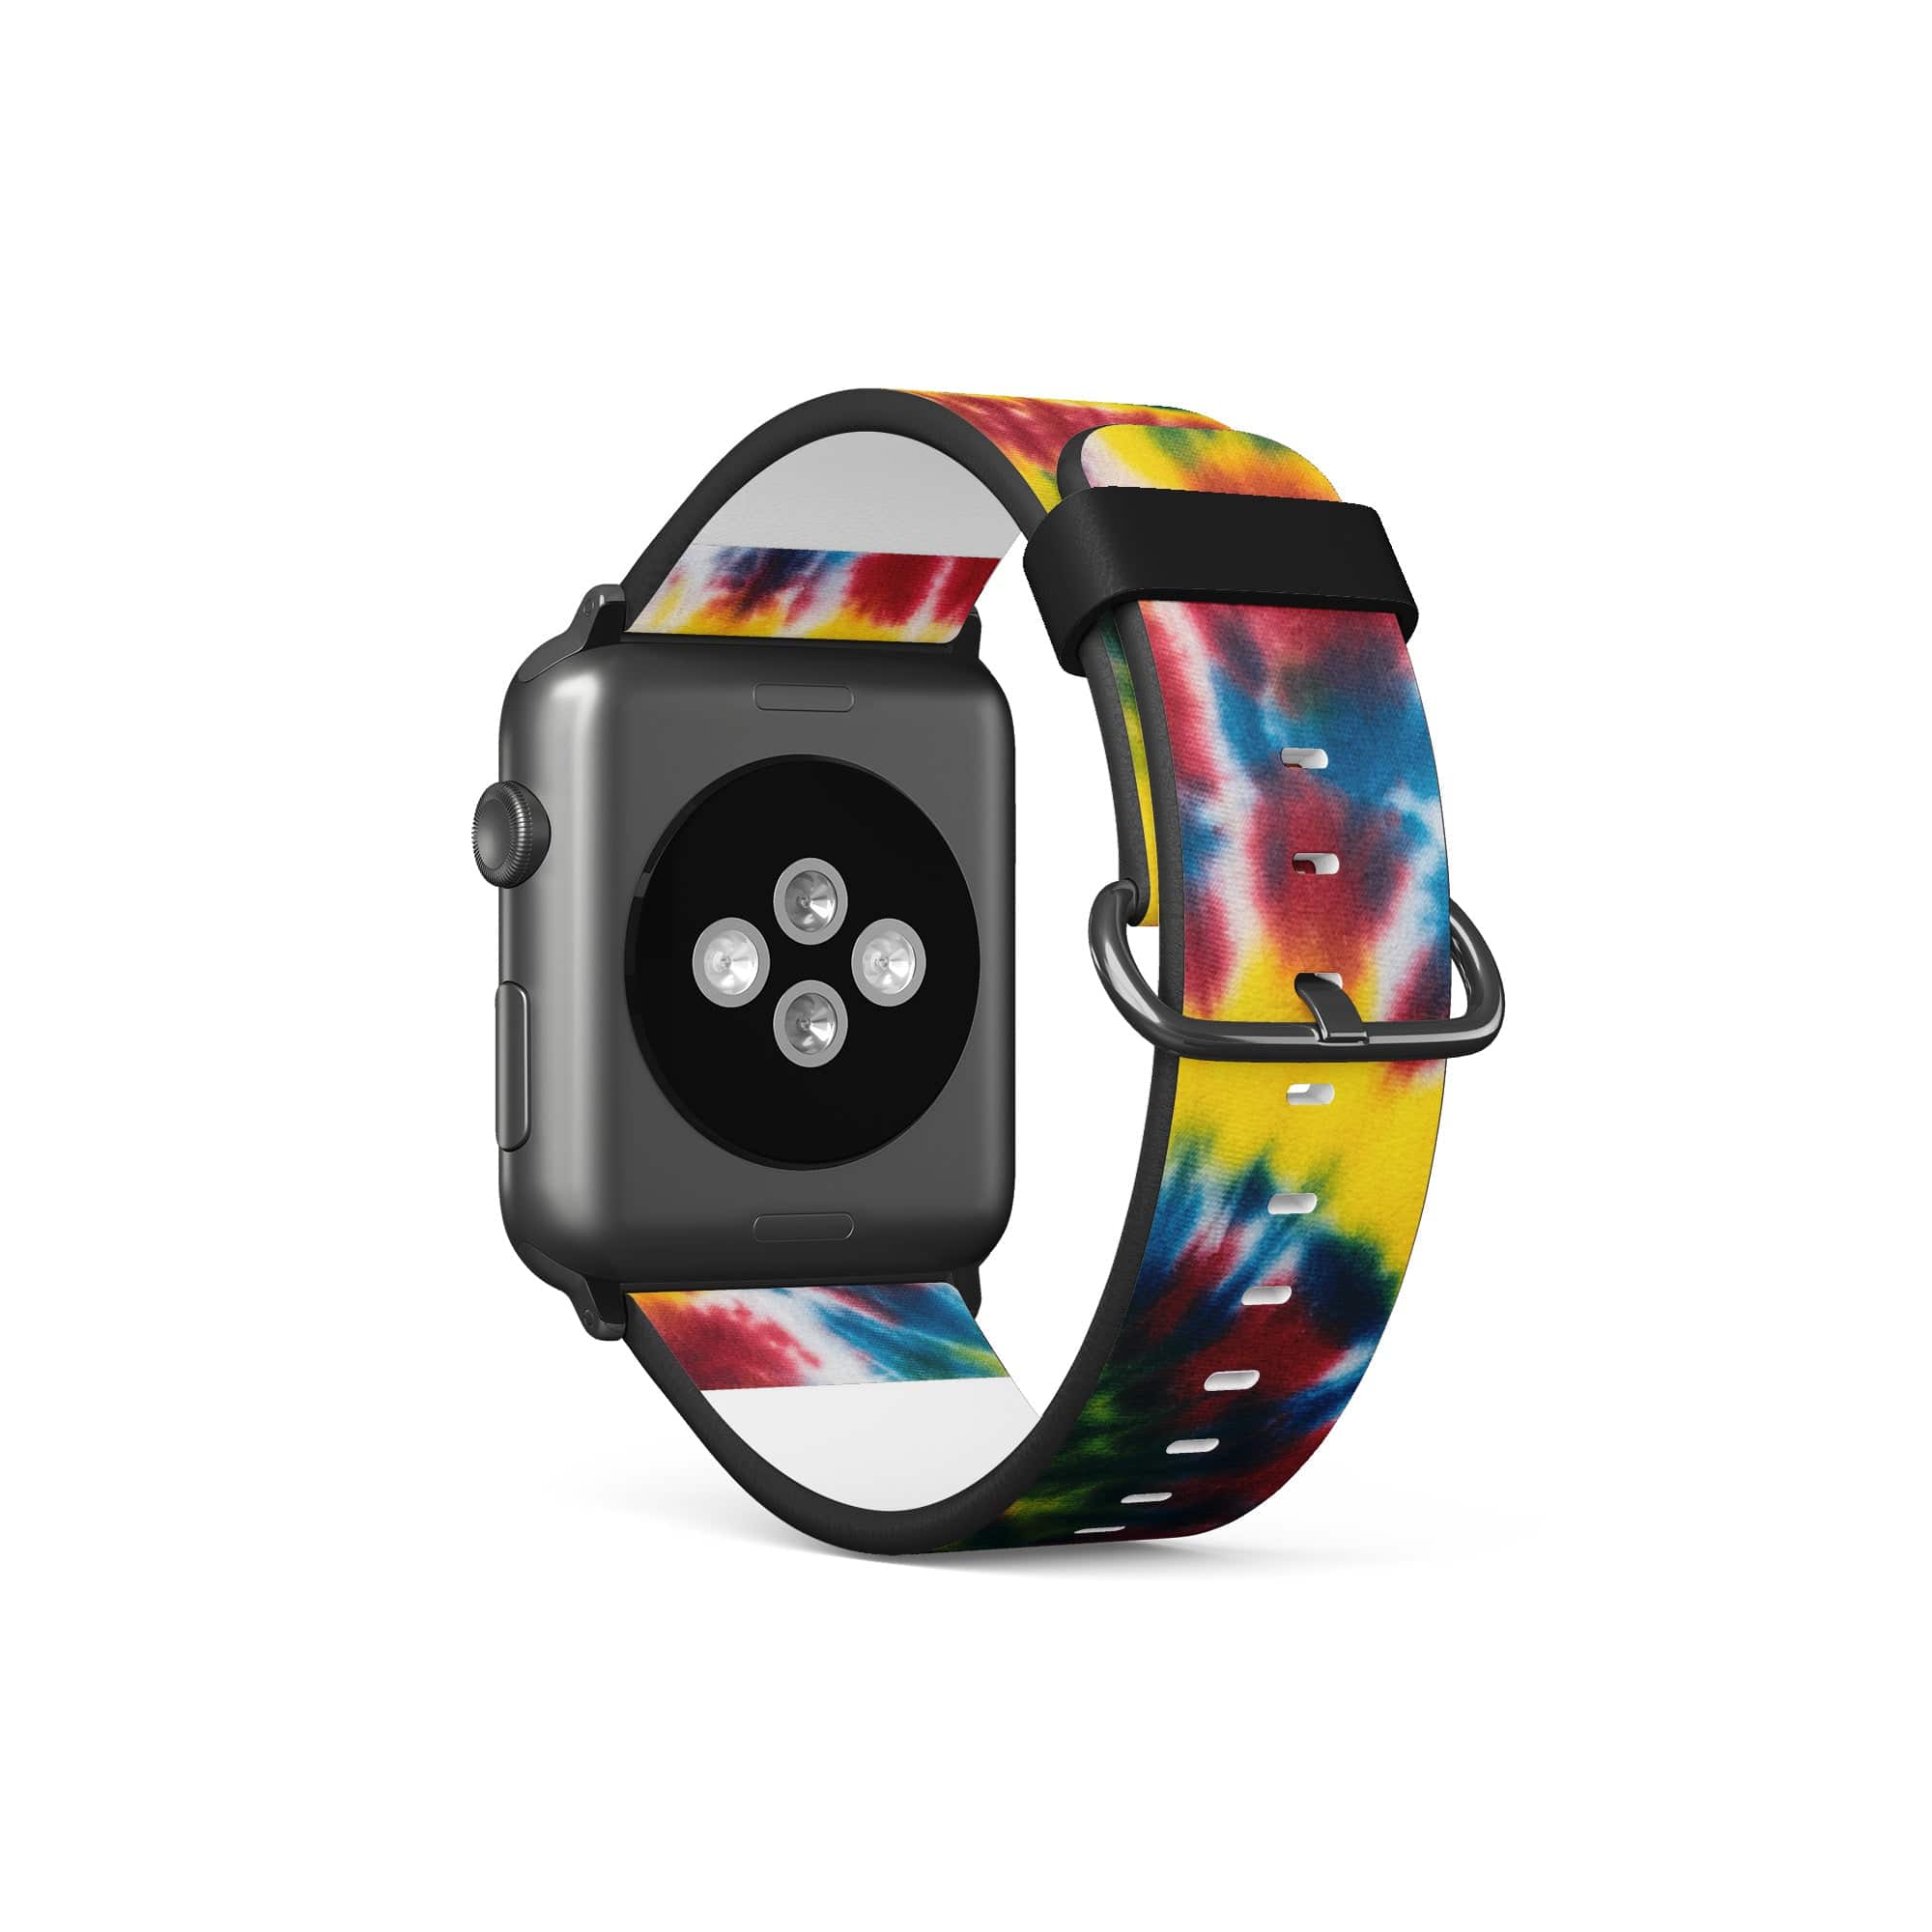 Out of Focus | Tie Dye Apple Watch Band